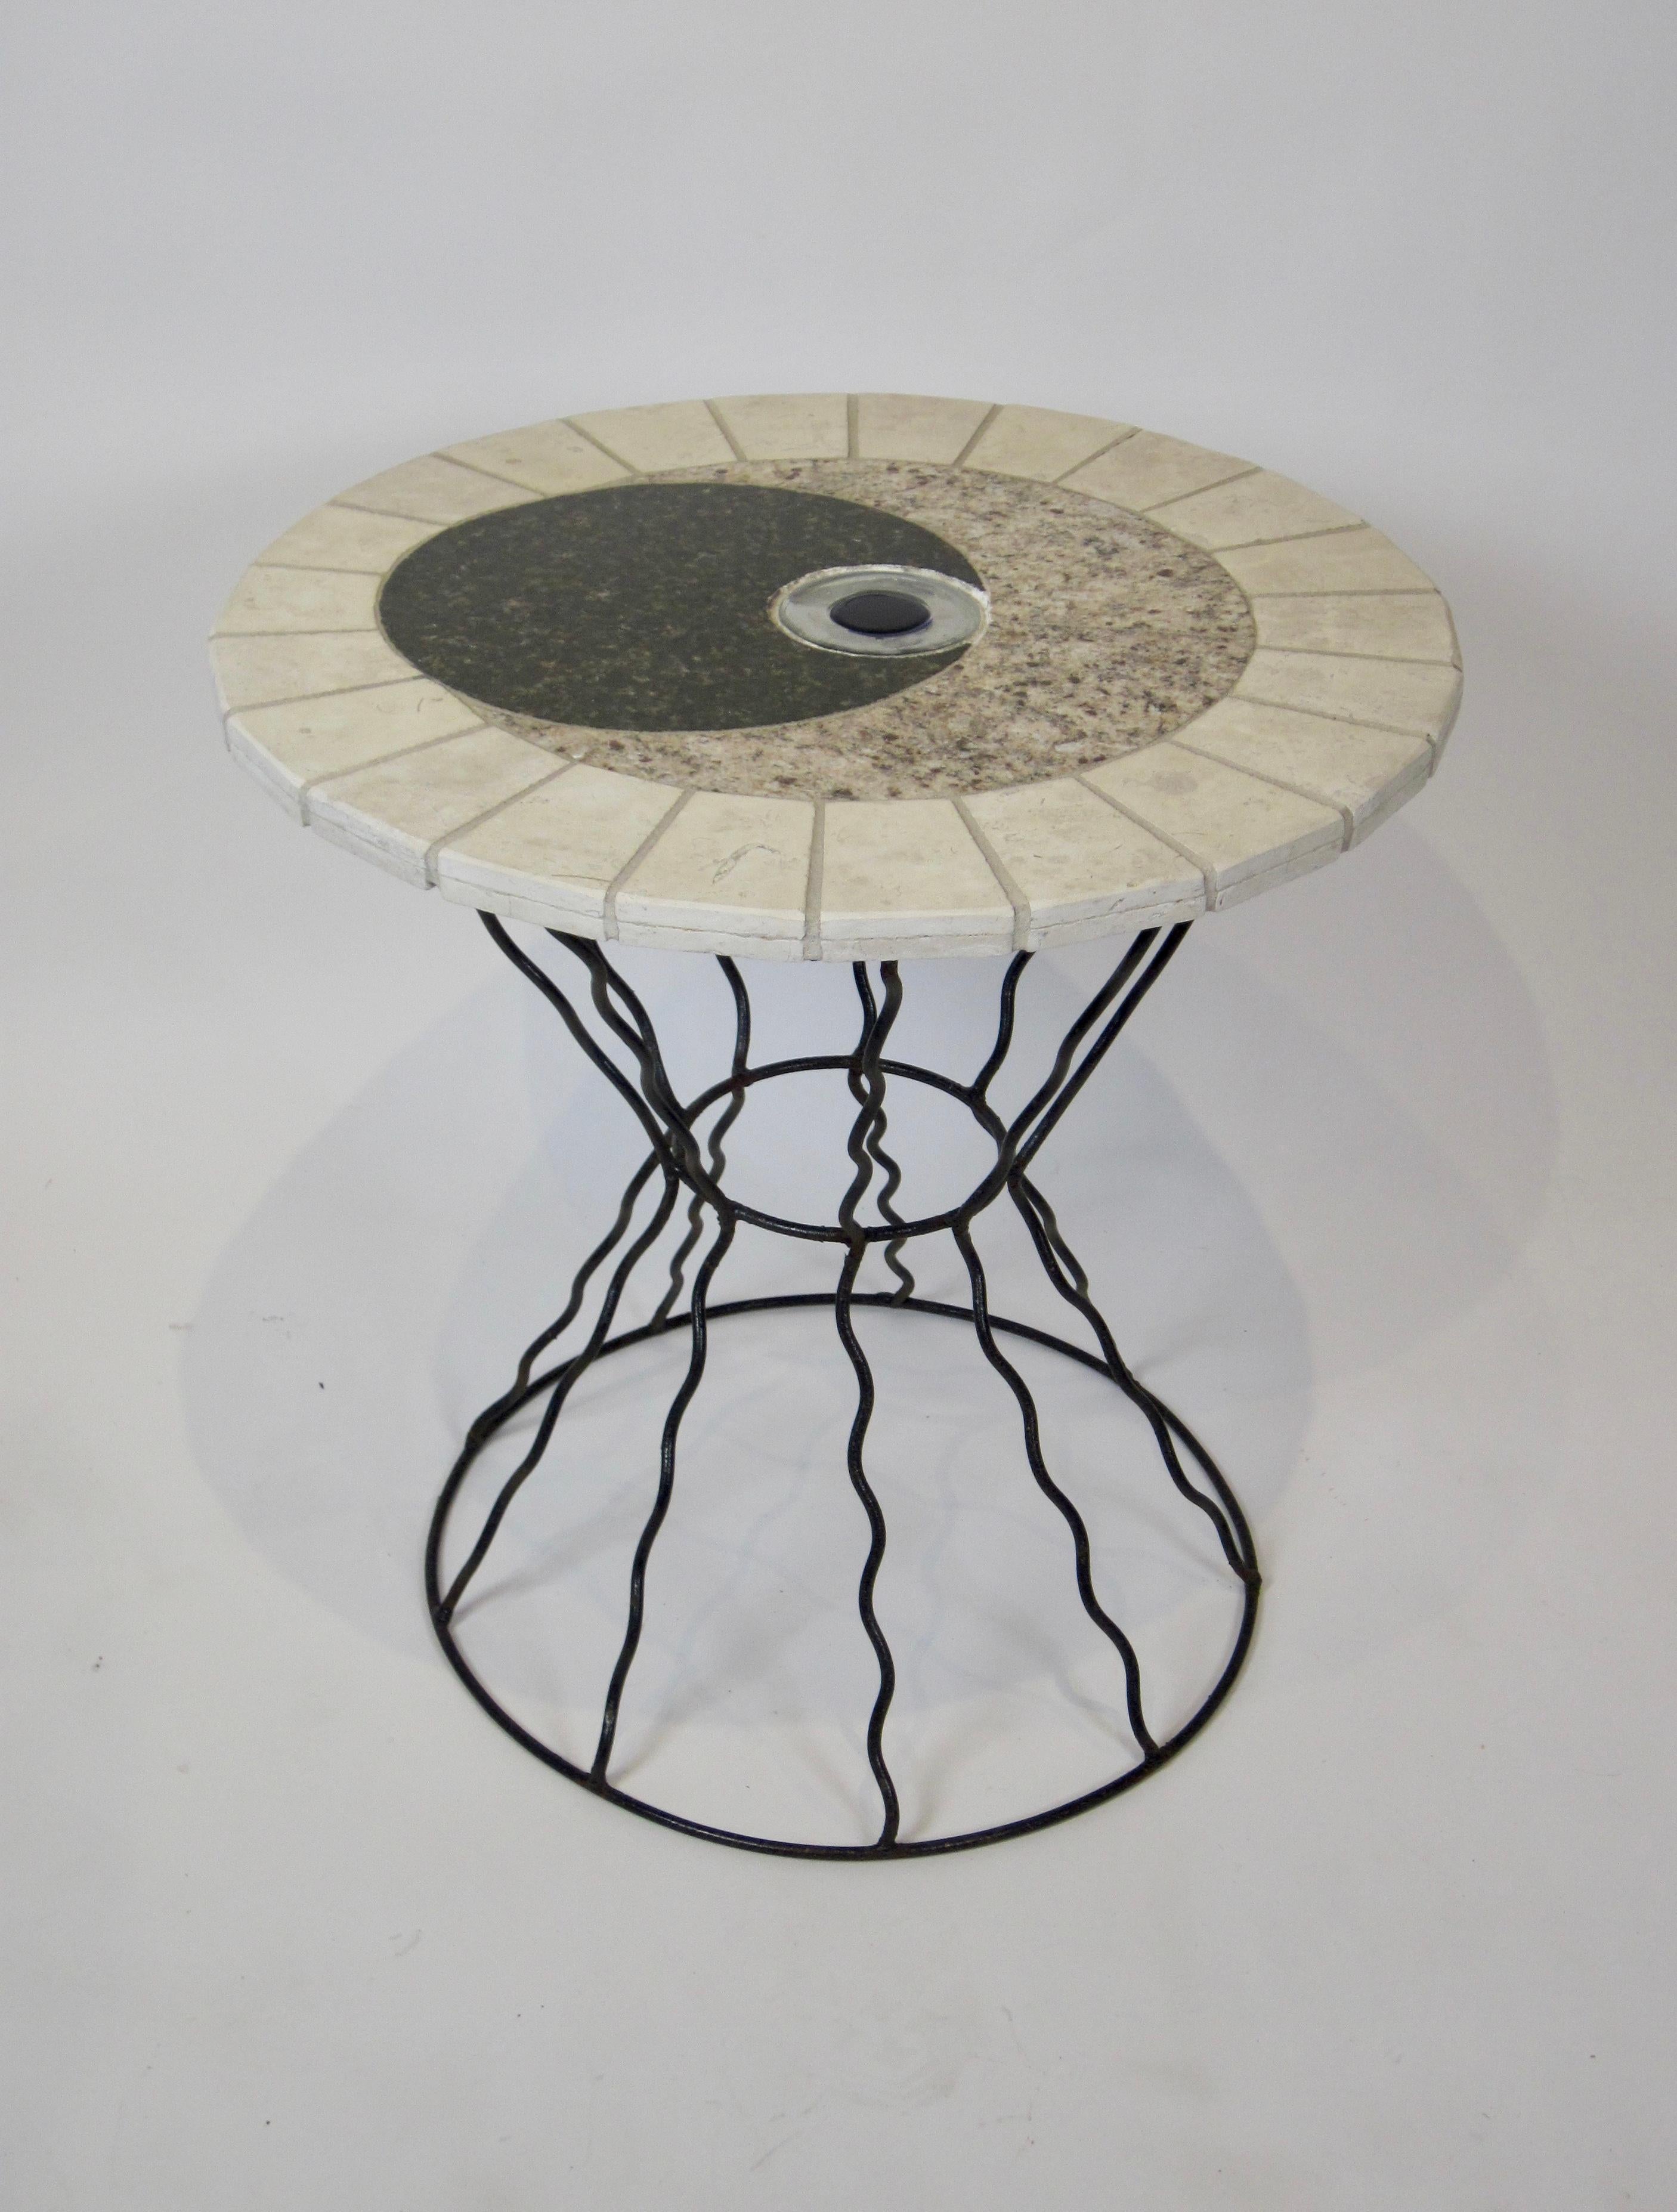 Round studio made top with travertine, granite, and glass. The top is supported by undulating wire rods gathered at the center creating a pinched waist. The two together bring to mind a modern Memphis design with a third eye feel. That is what I